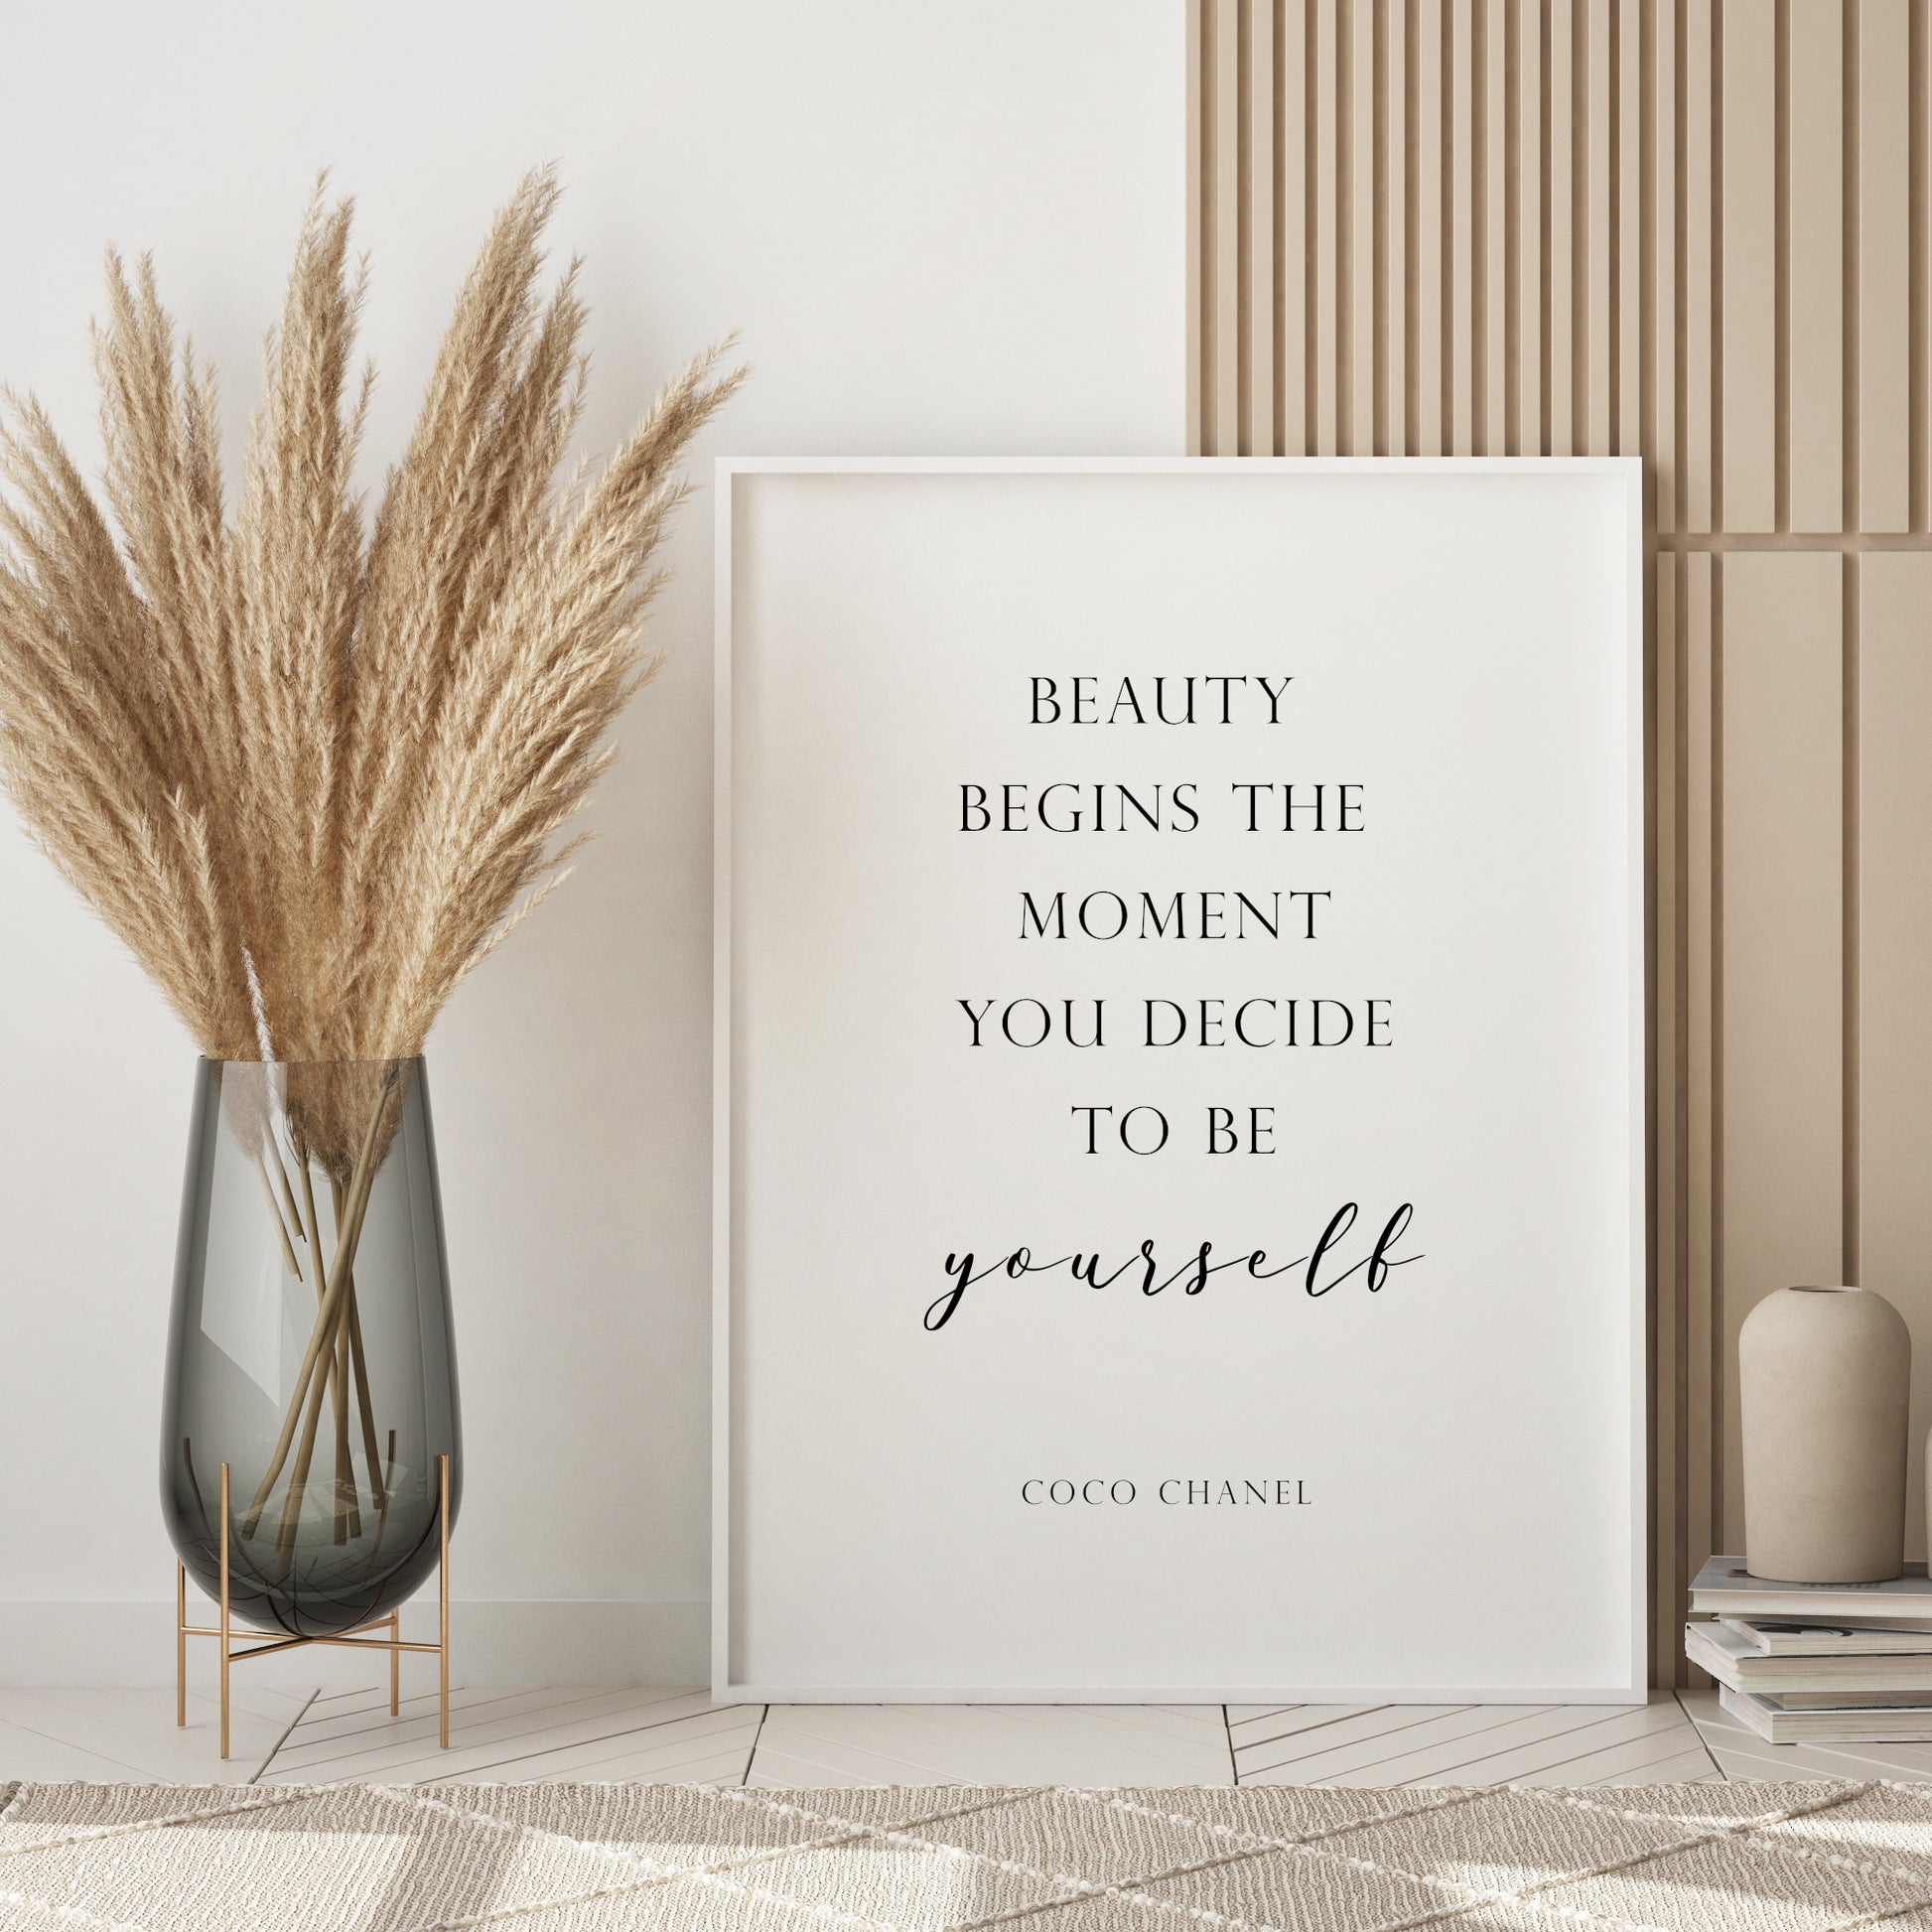 Beauty Begins The Moment You Decide To Be Yourself (Coco Chanel